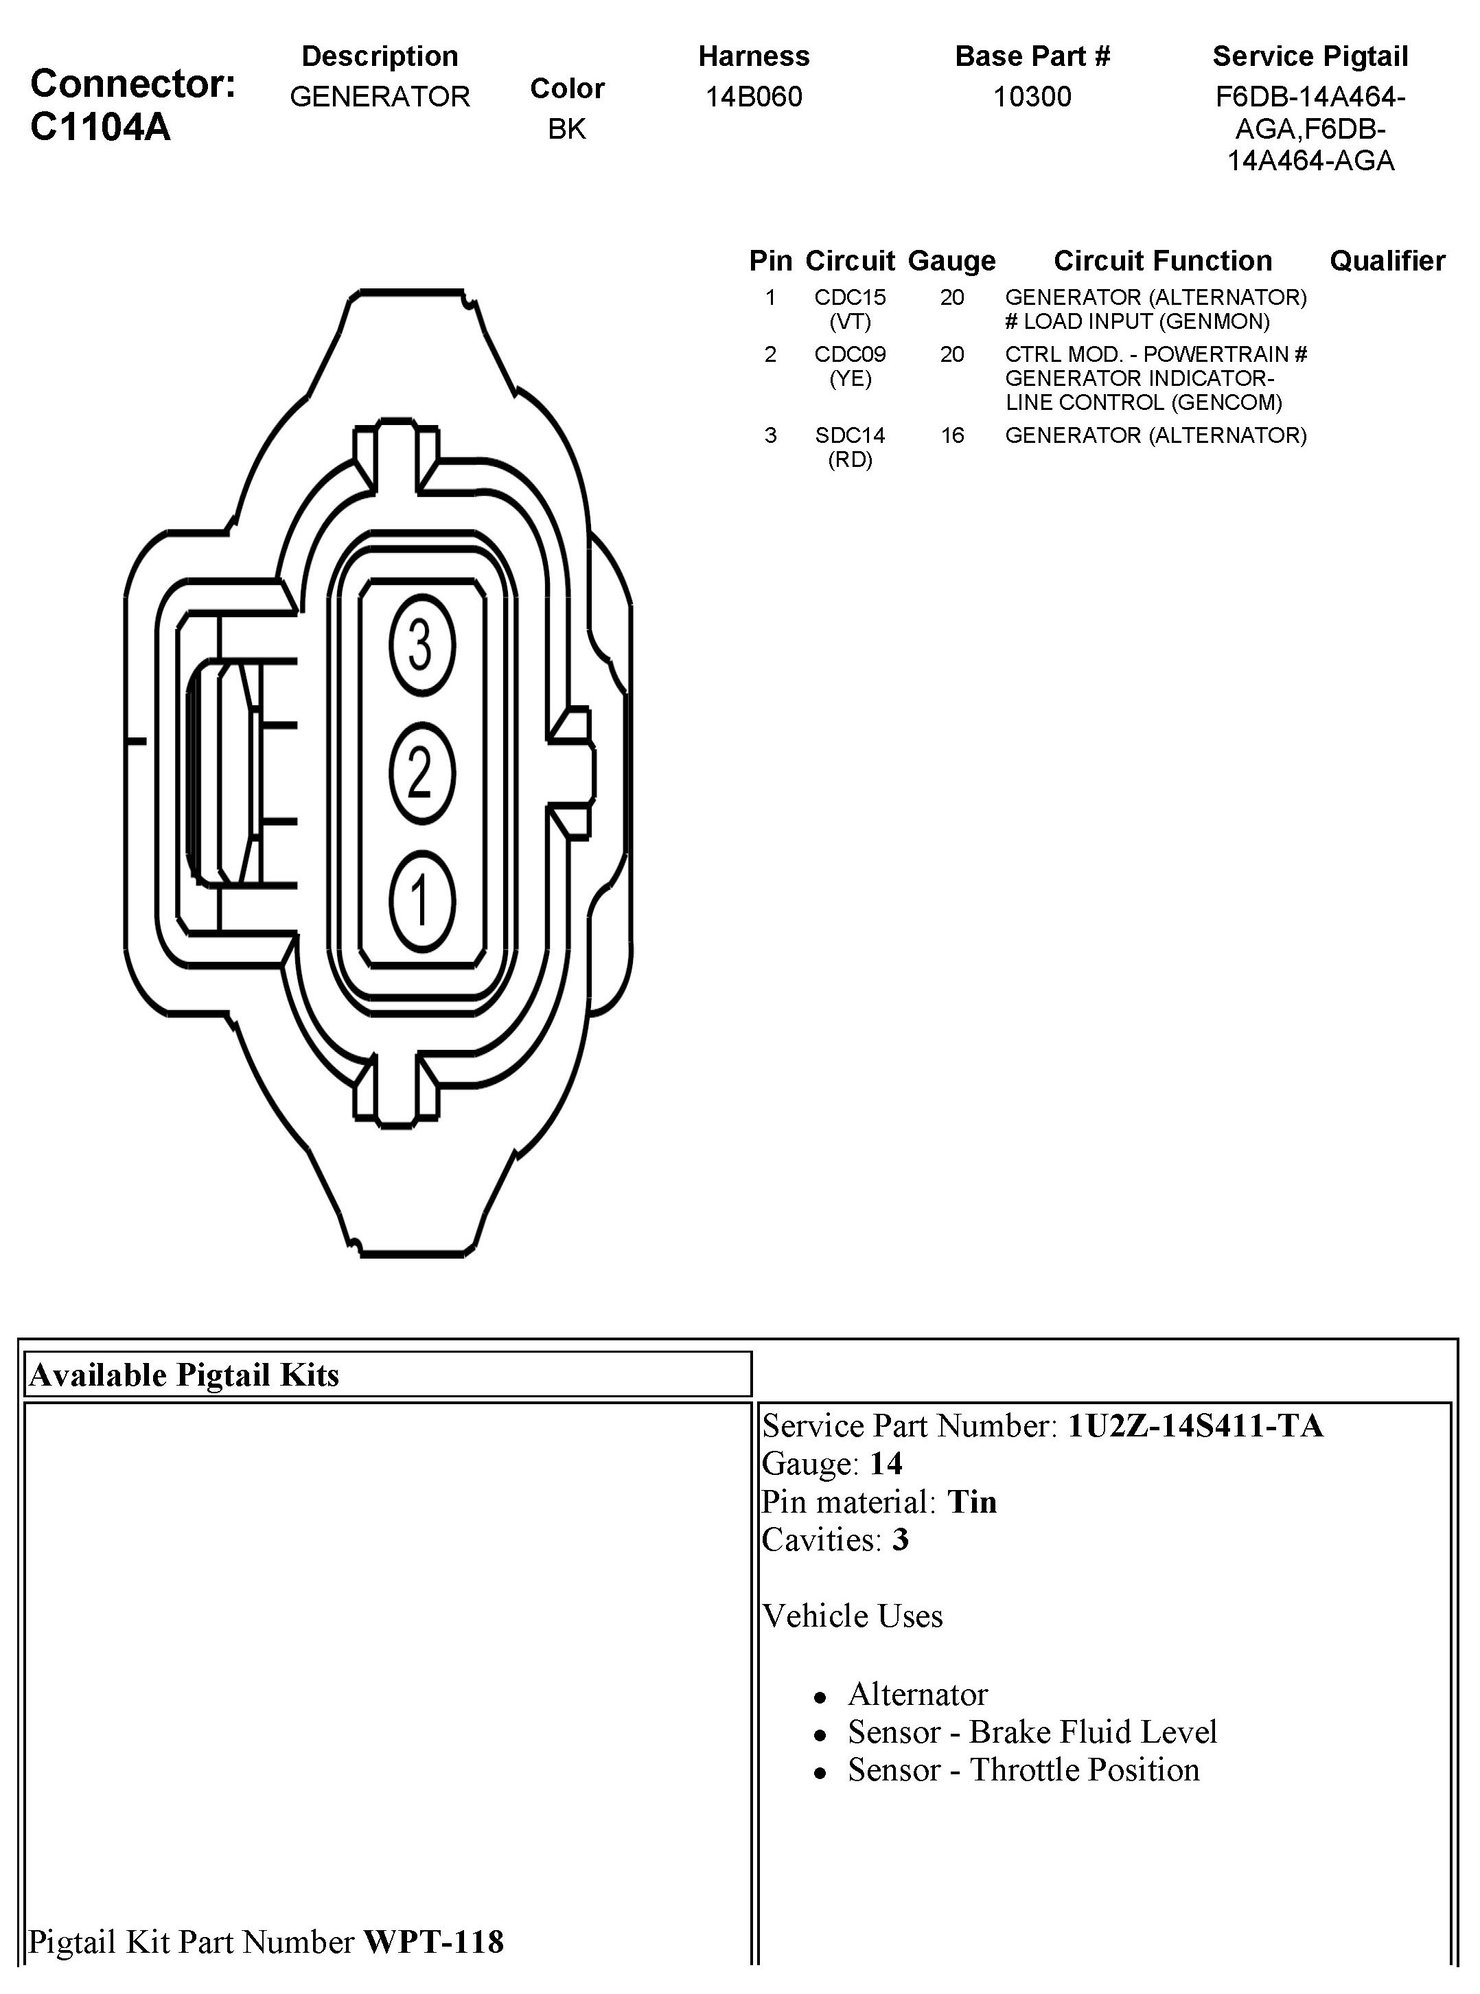 2011 6.7 CC Battery light on the dash - Ford Truck Enthusiasts Forums  2012 Ford 6.7 Alternator Wiring Diagram    Ford Truck Enthusiasts